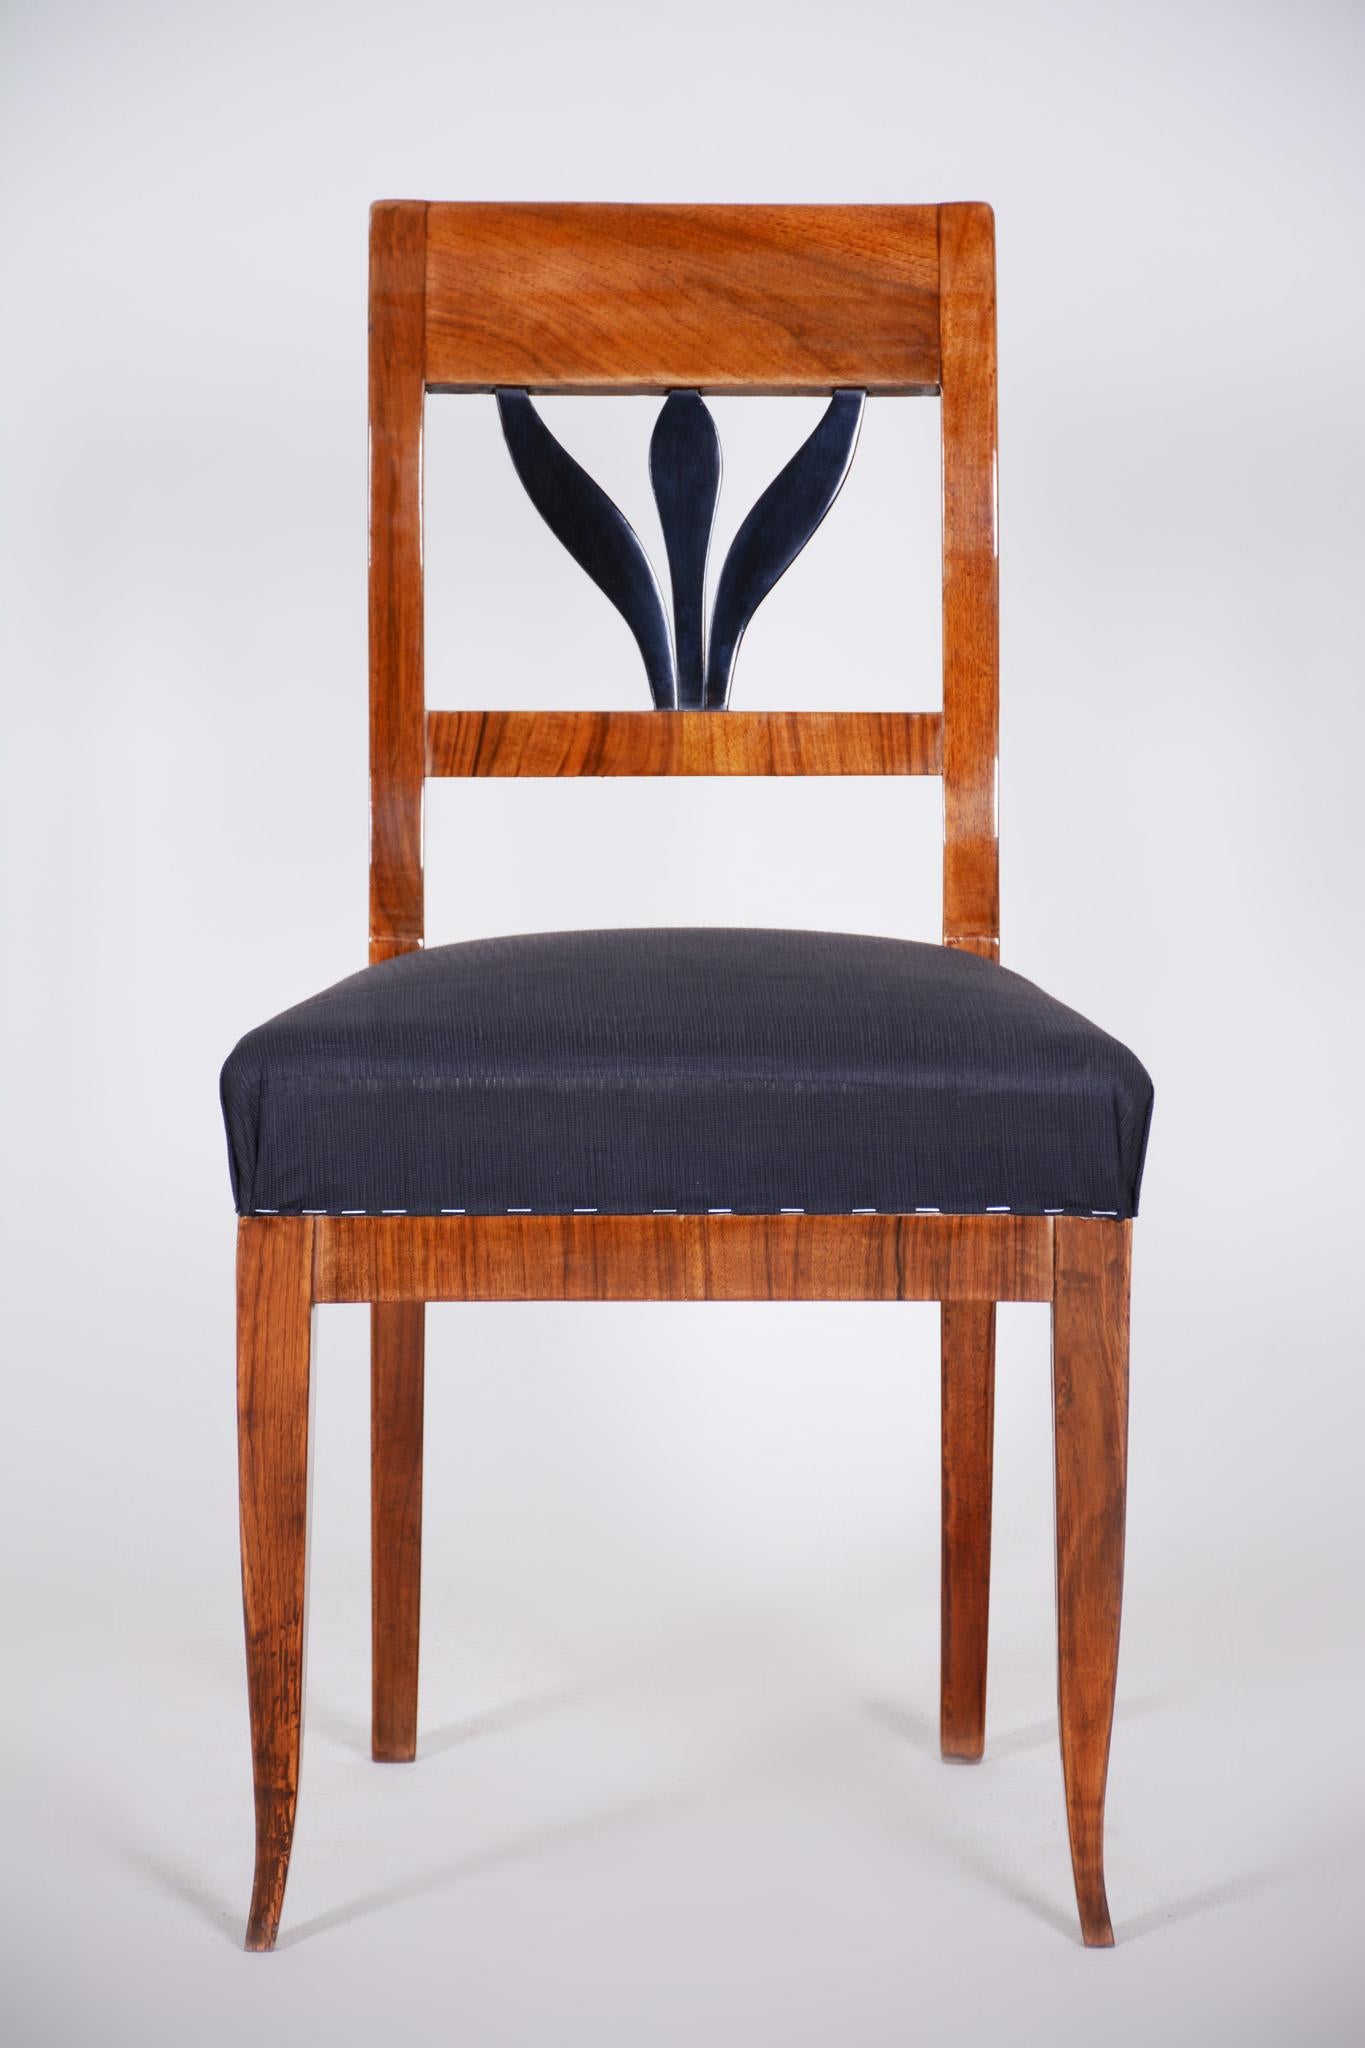 Biedermeier chair
Completely restored.
Source: Czechia (Bohemia)
Period: 1830-1839
Shellac-polish.

We guarantee safe a the cheapest air transport from Europe to the whole world within 7 days.
The price is the same as for ship transport but delivery